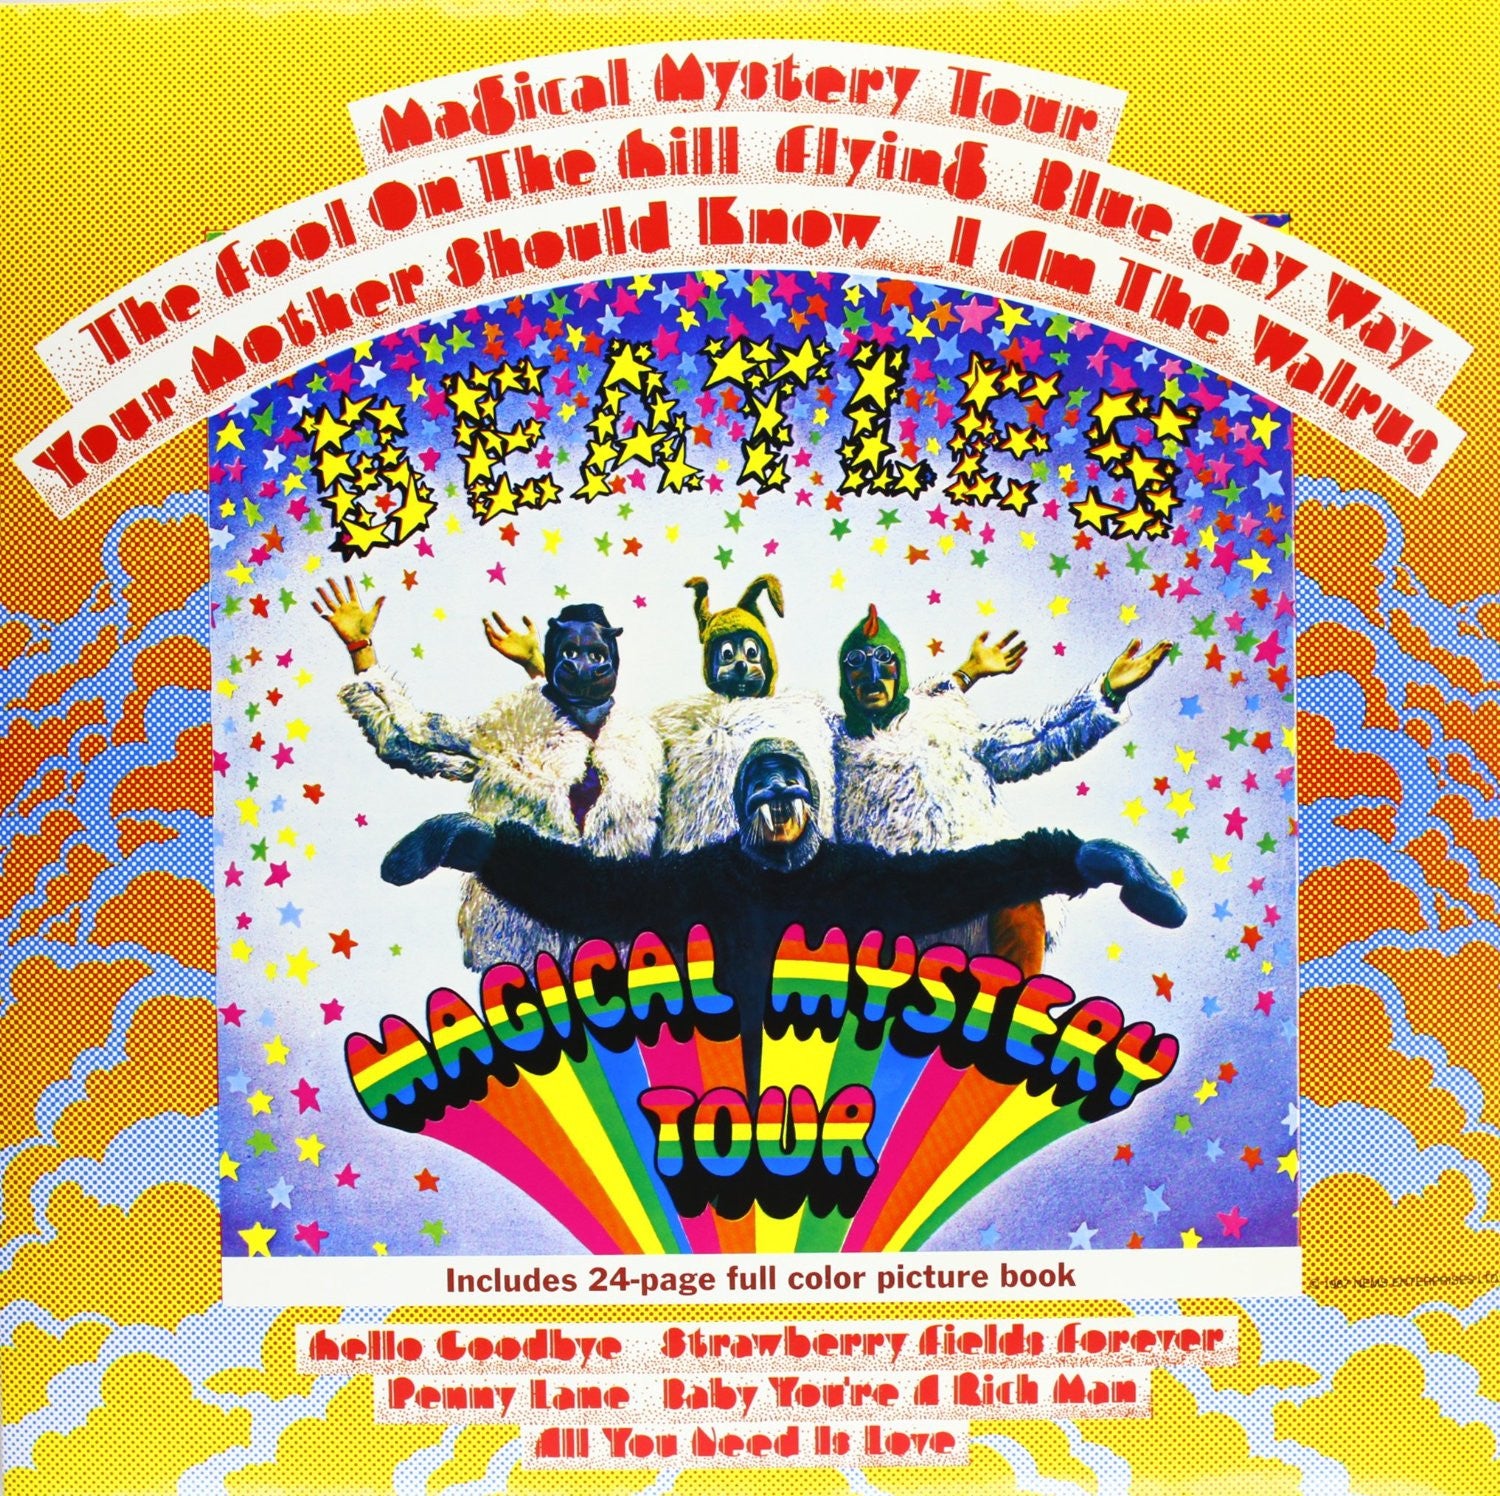 Beatles, The - Magical Mystery Tour